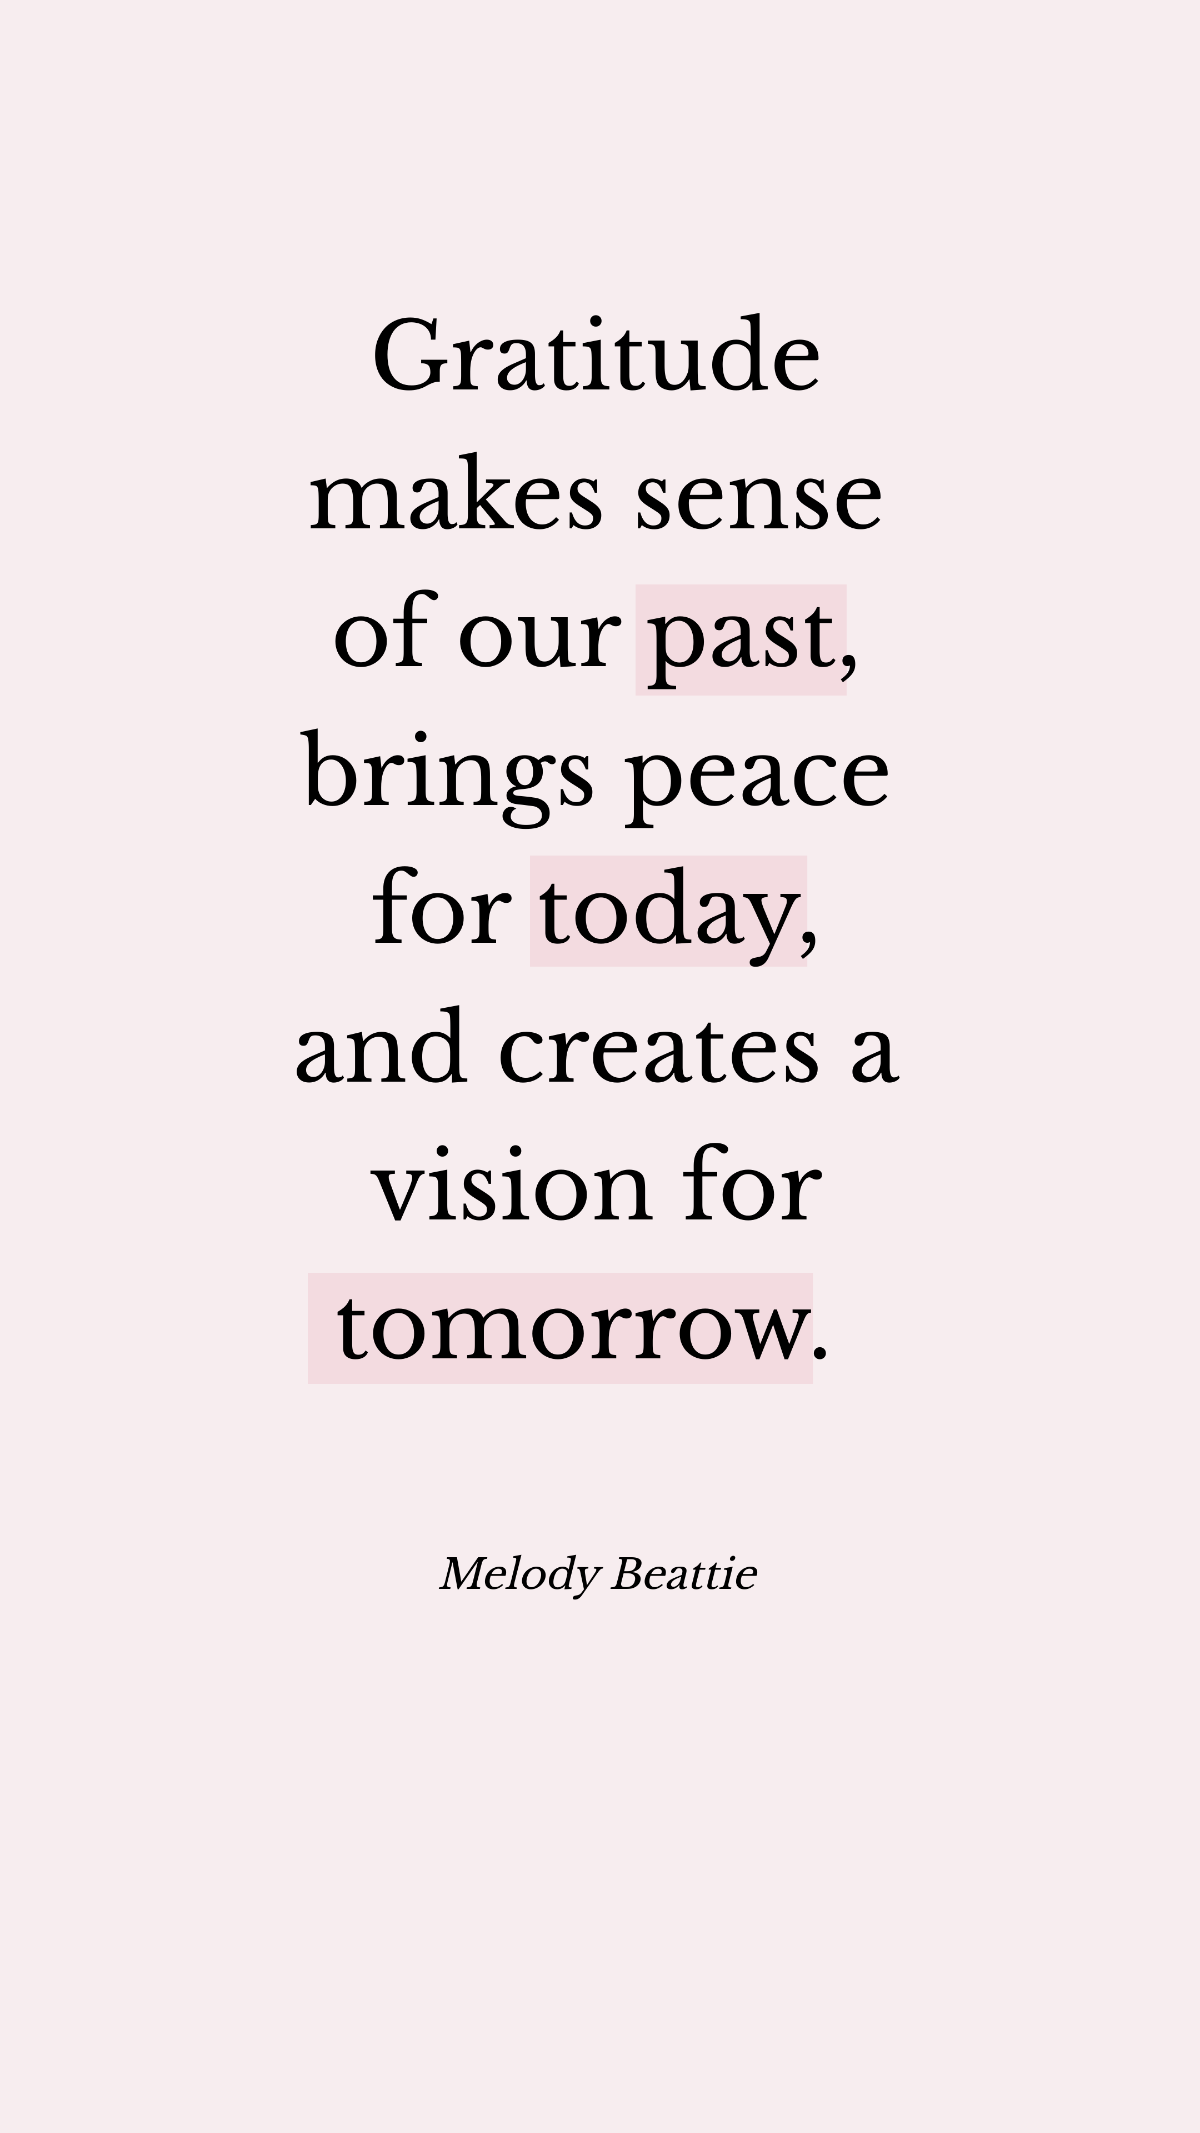 Free Melody Beattie - Gratitude makes sense of our past, brings peace for today, and creates a vision for tomorrow. Template